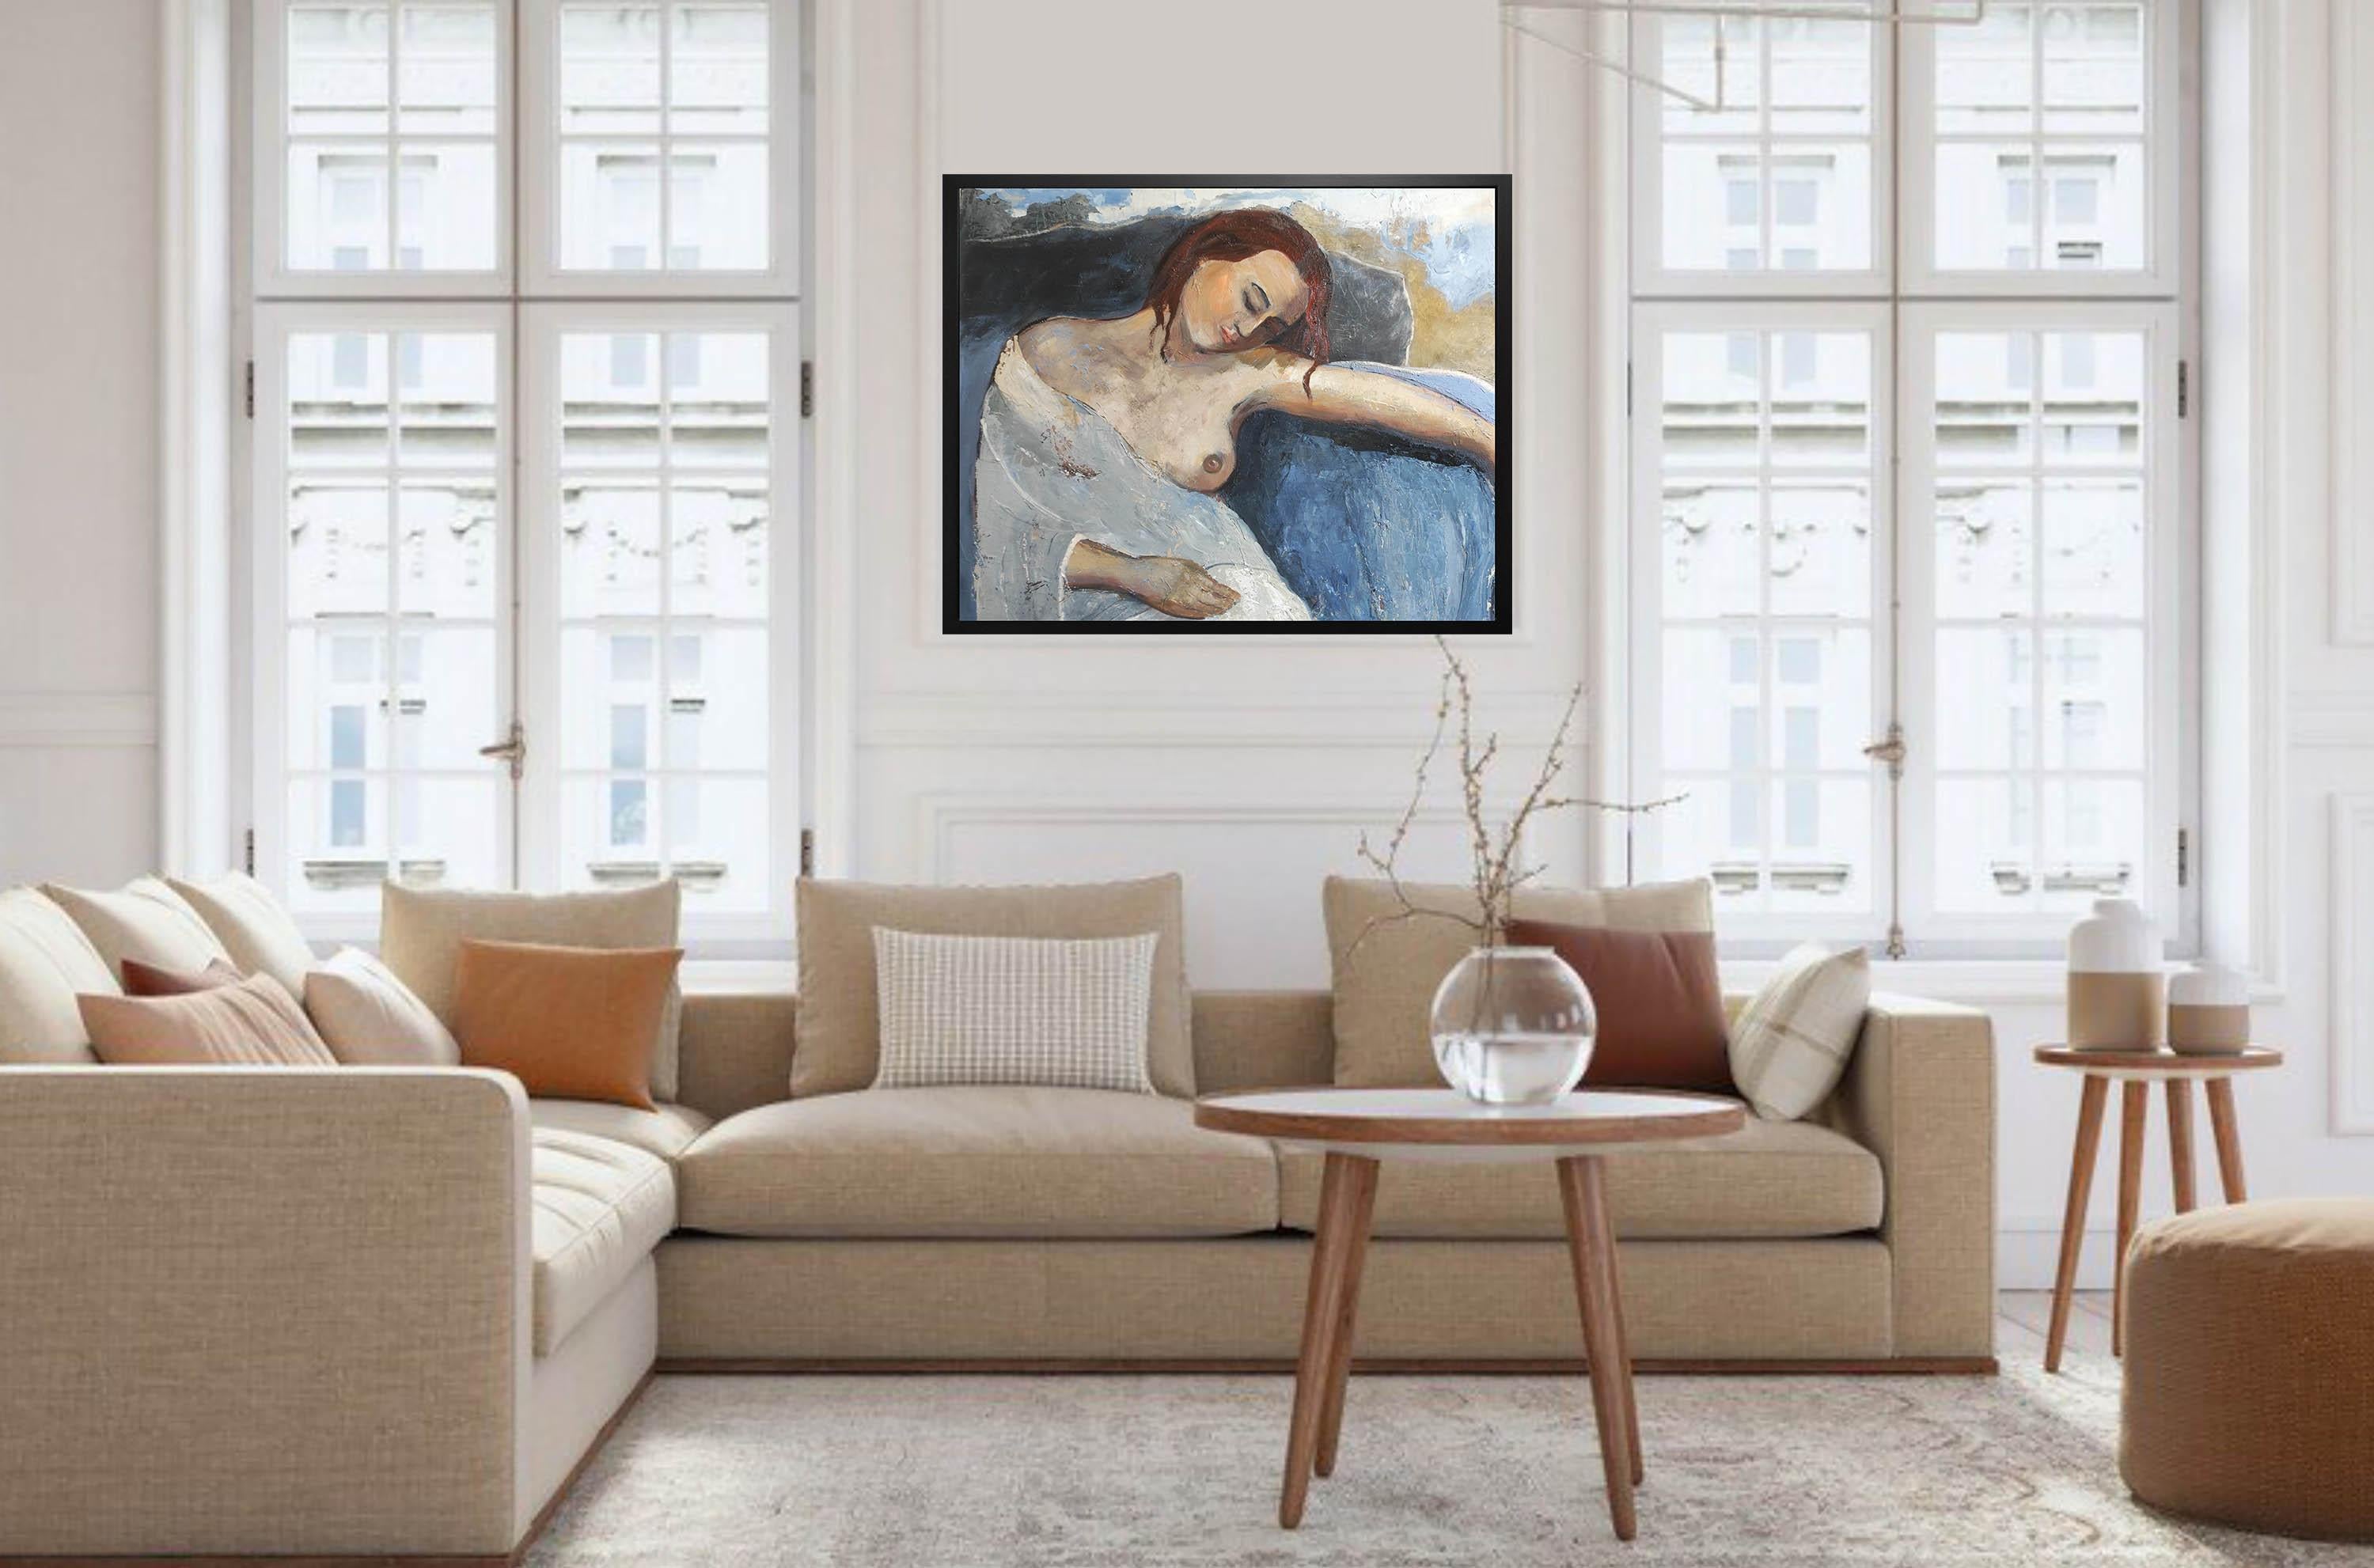 The body is a wordless poetry that painting brings to life.
portrait of a seated woman, bare breasts and a white drape over her thighs. the woman is asleep and the painting inspires calm and serenity, the colors of the body are warm and are offset